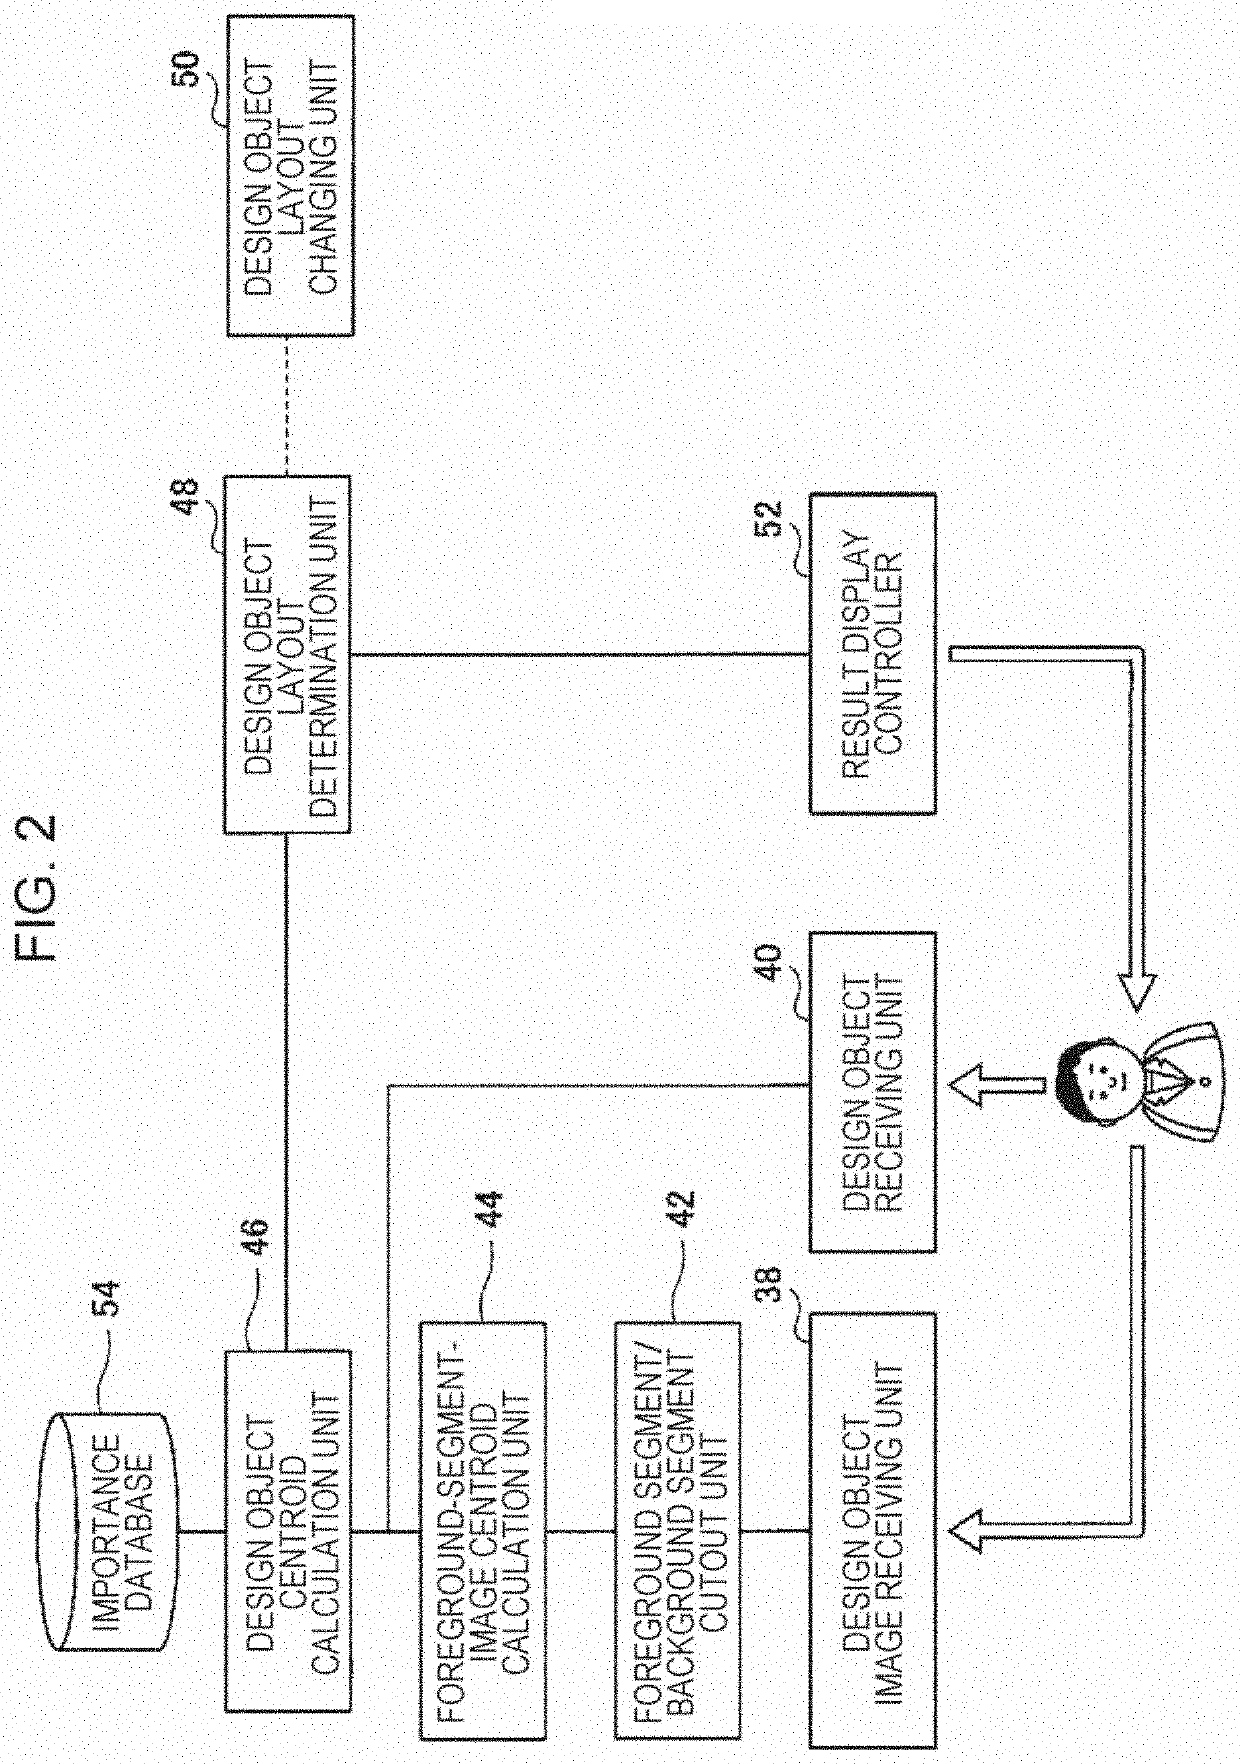 Image processing apparatus and non-transitory computer readable medium